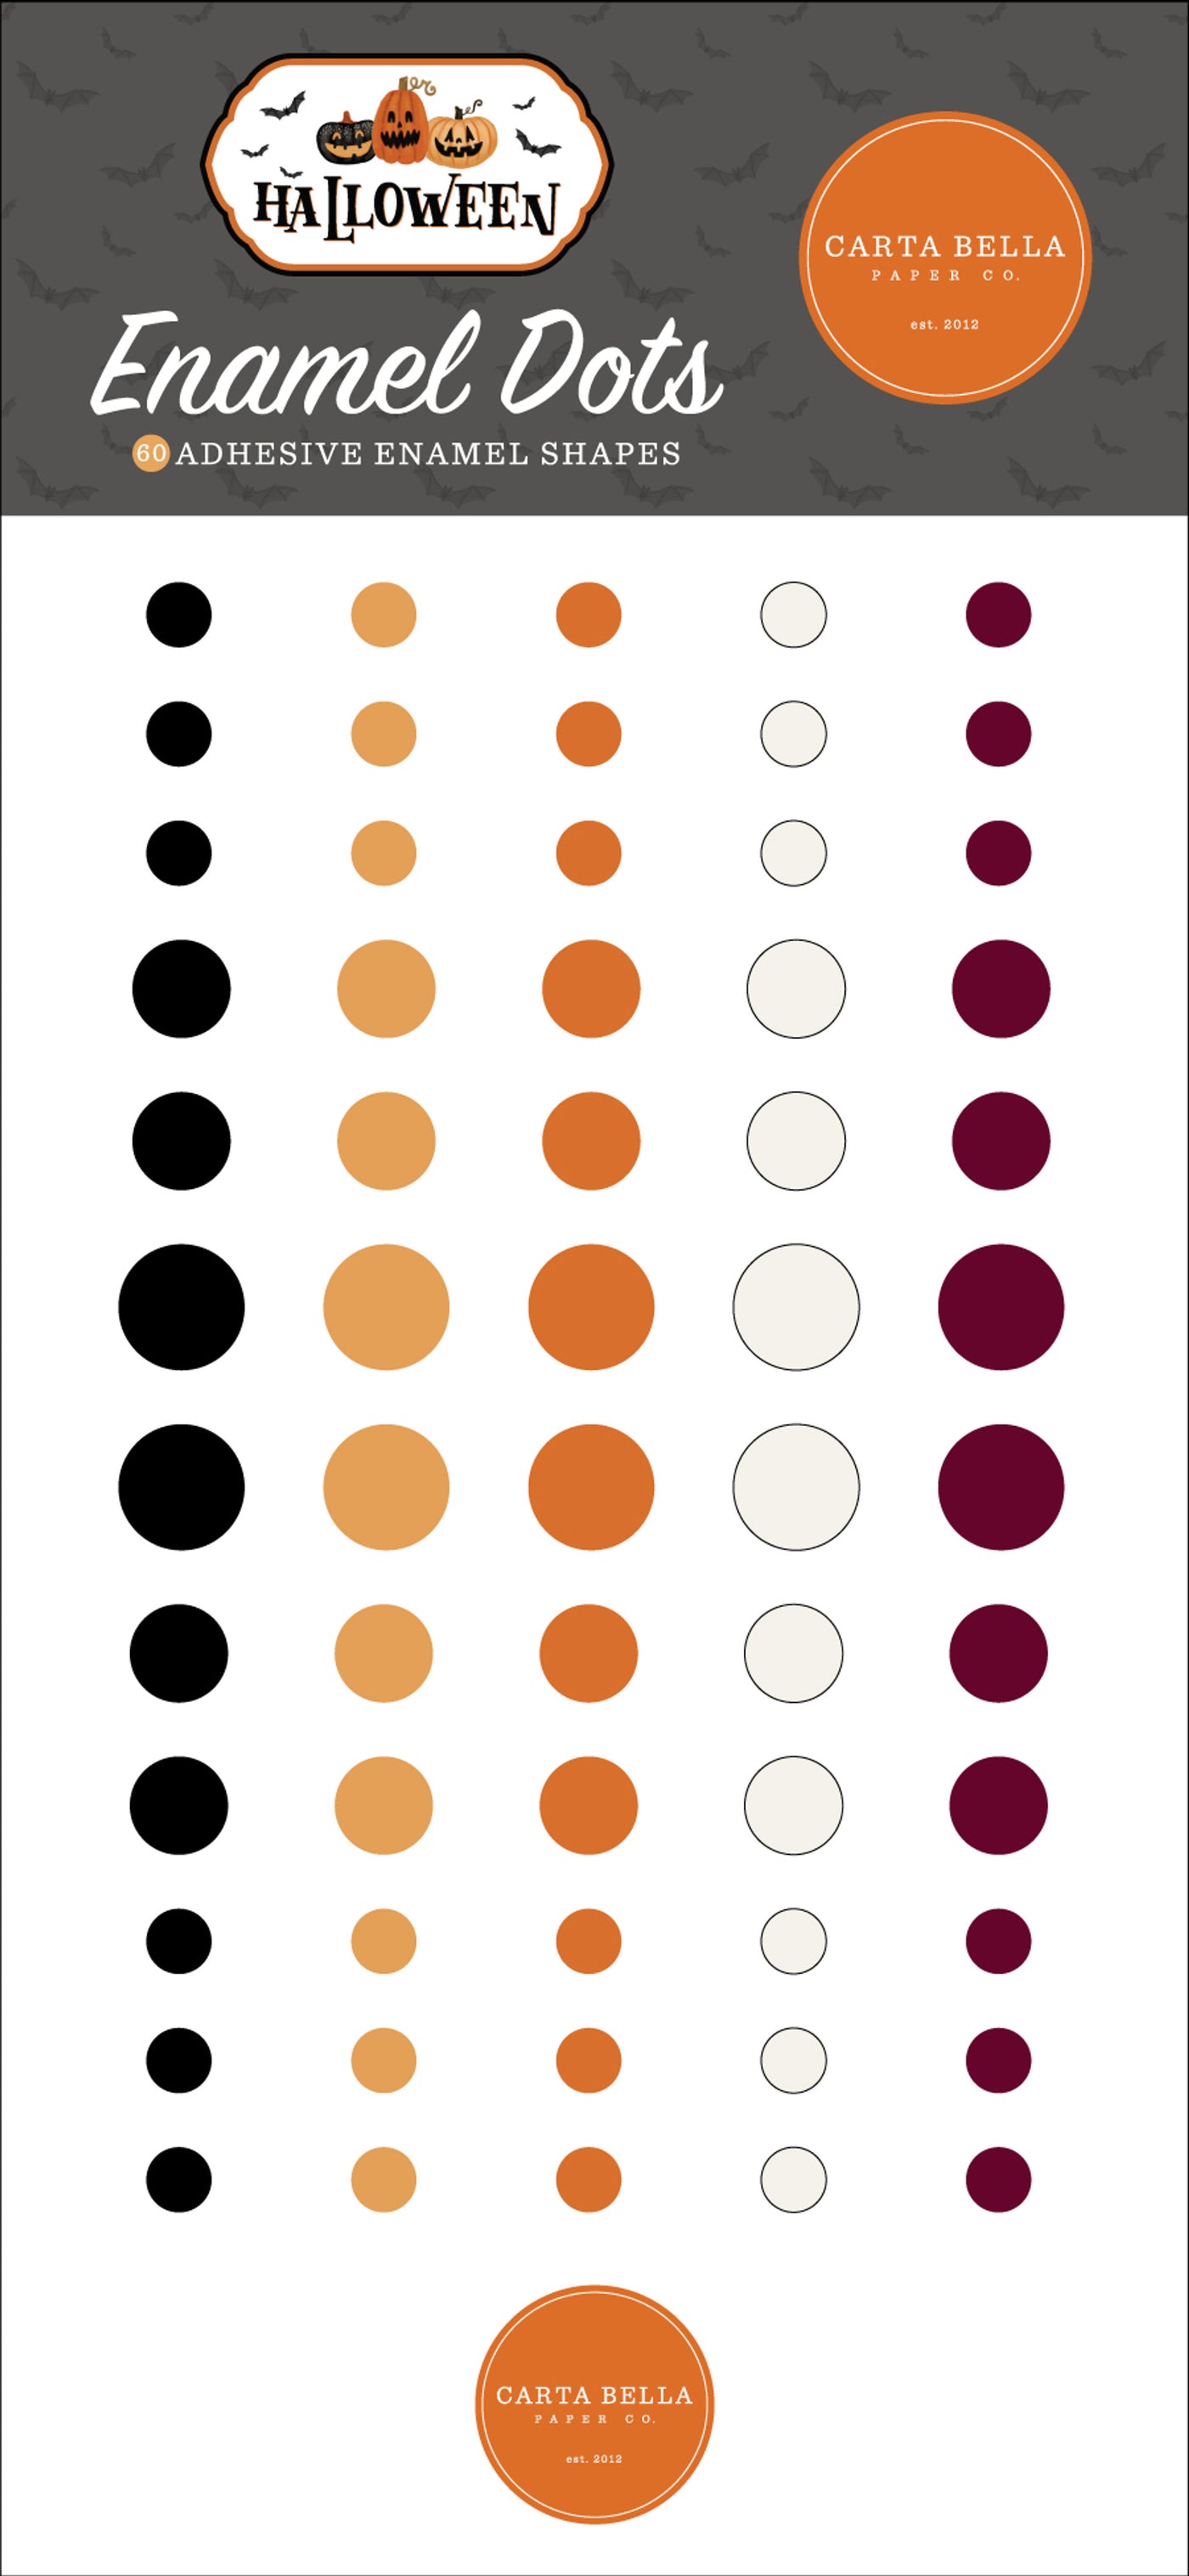 60 Enamel Dots in 3 sizes, adhesive back, designed to coordinate with the Halloween Collection by Carta Bella.